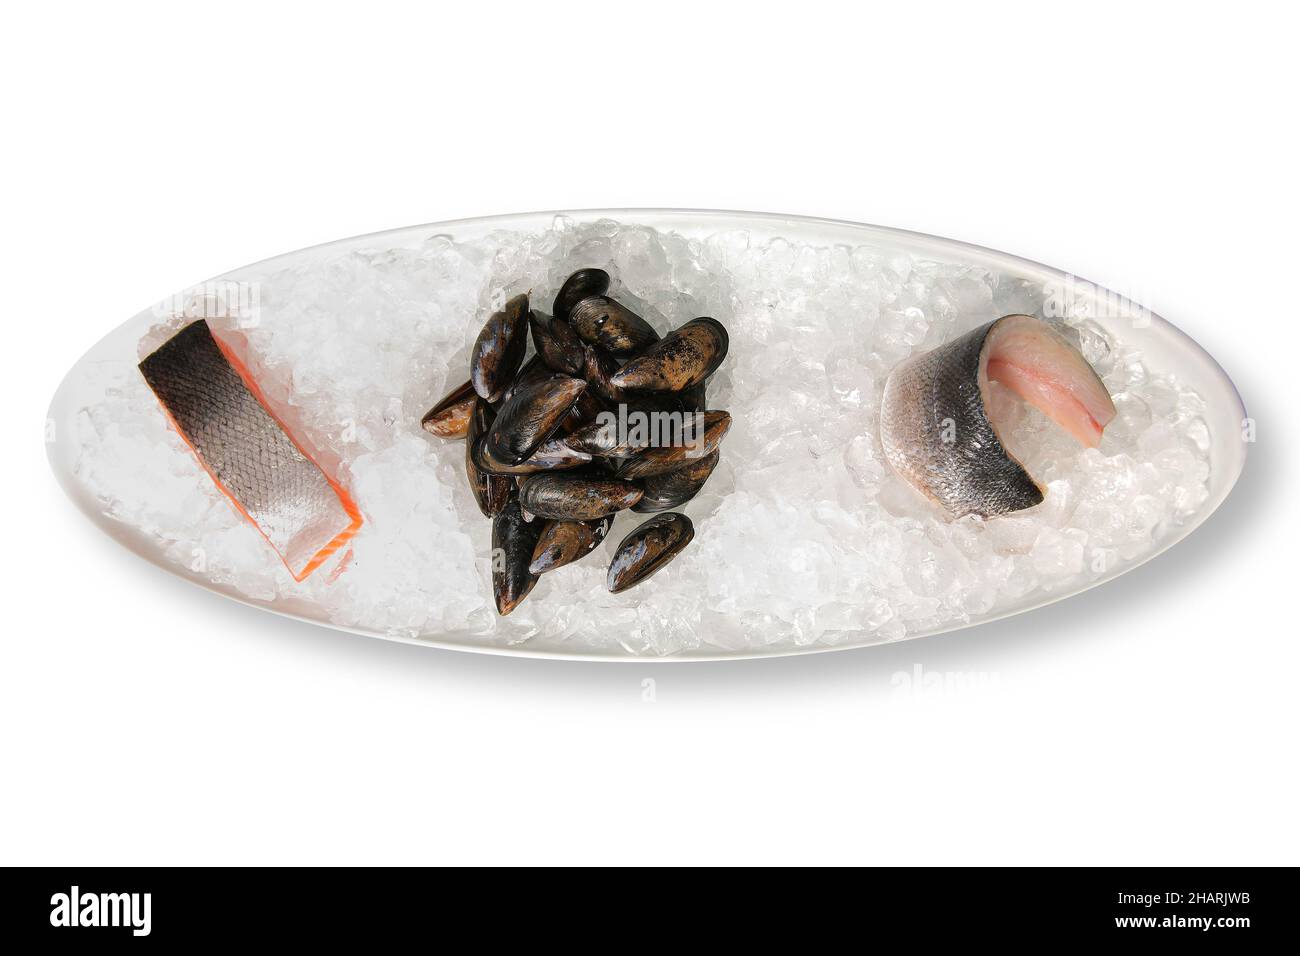 Salmon mussels and sea bass on a bed of ice Stock Photo